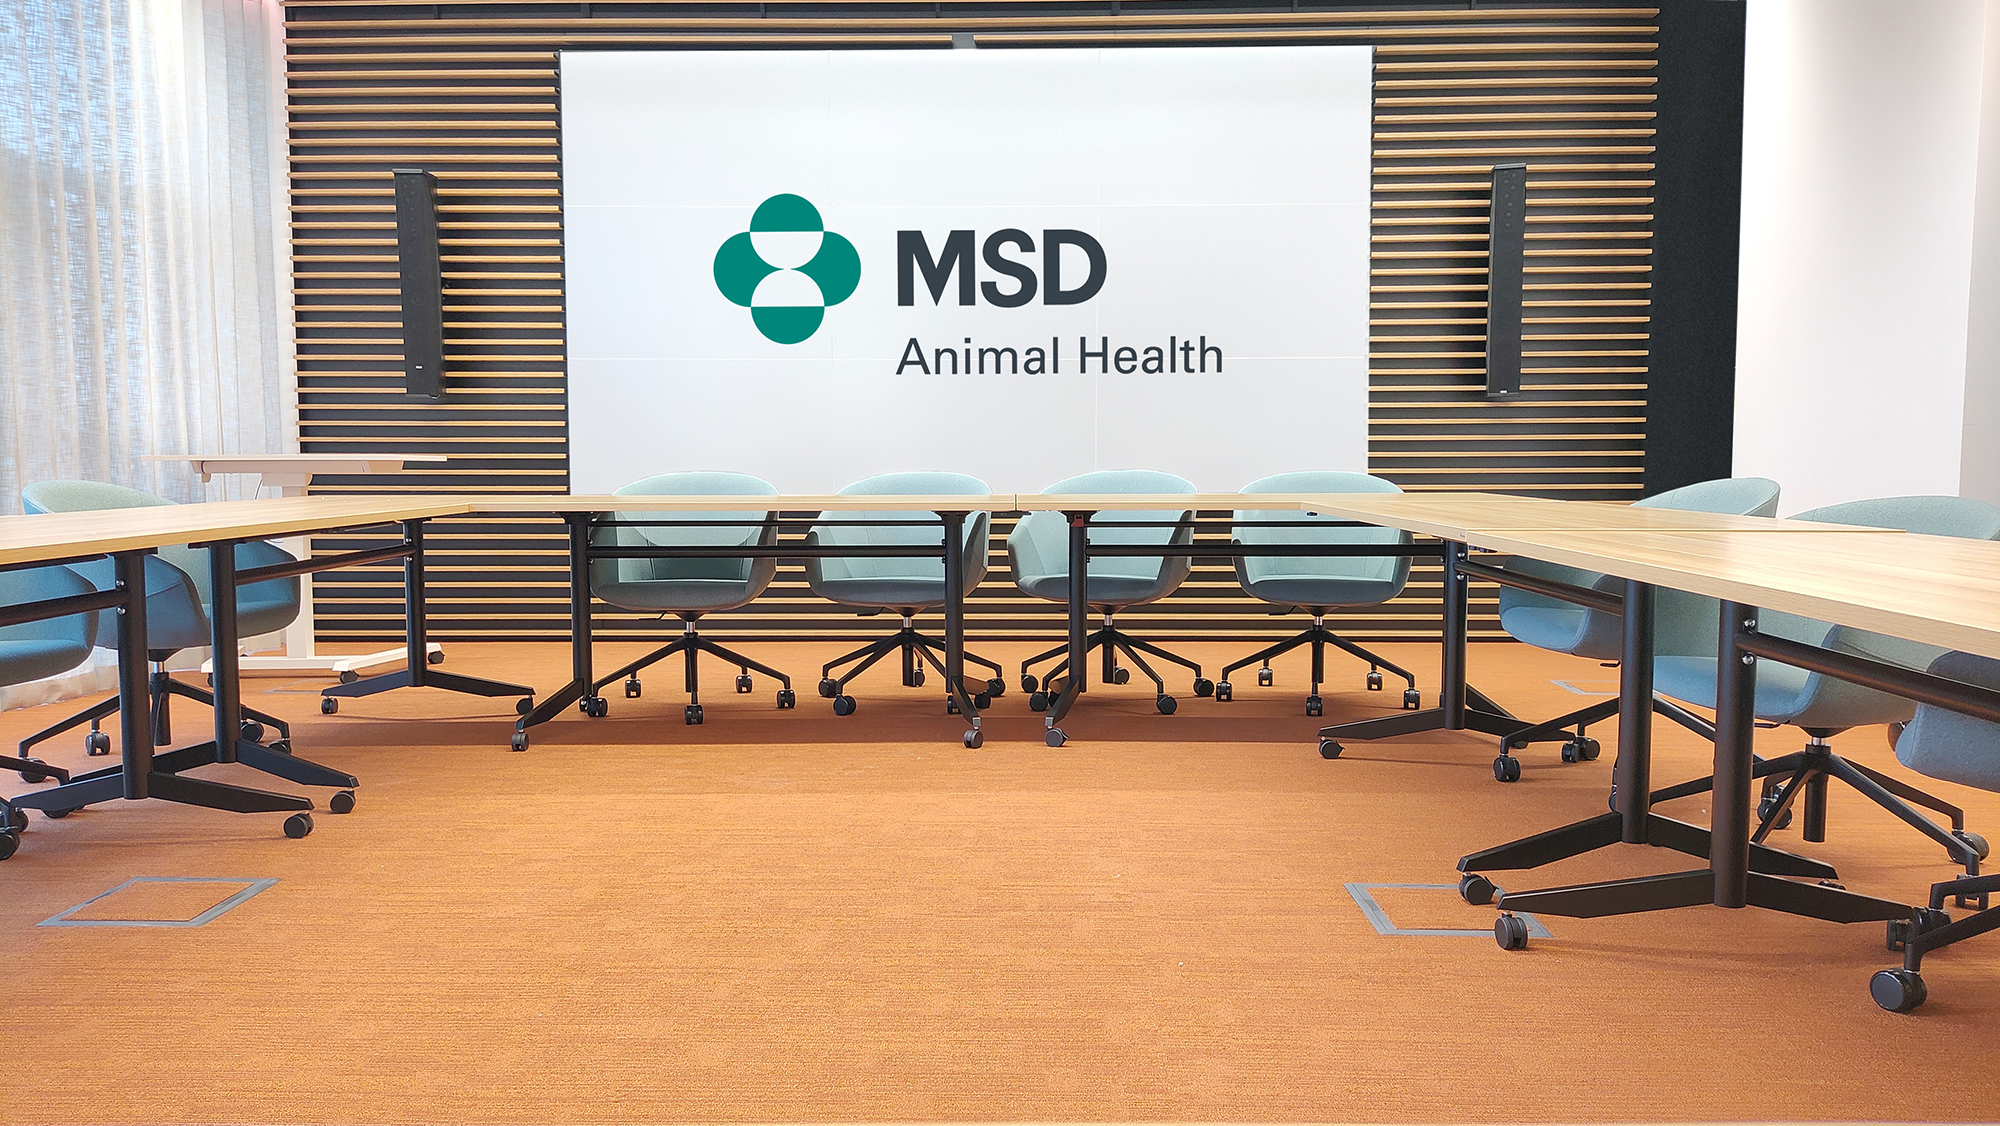 NEXO sound leads the field for new MSD Animal Health experience center in Poland